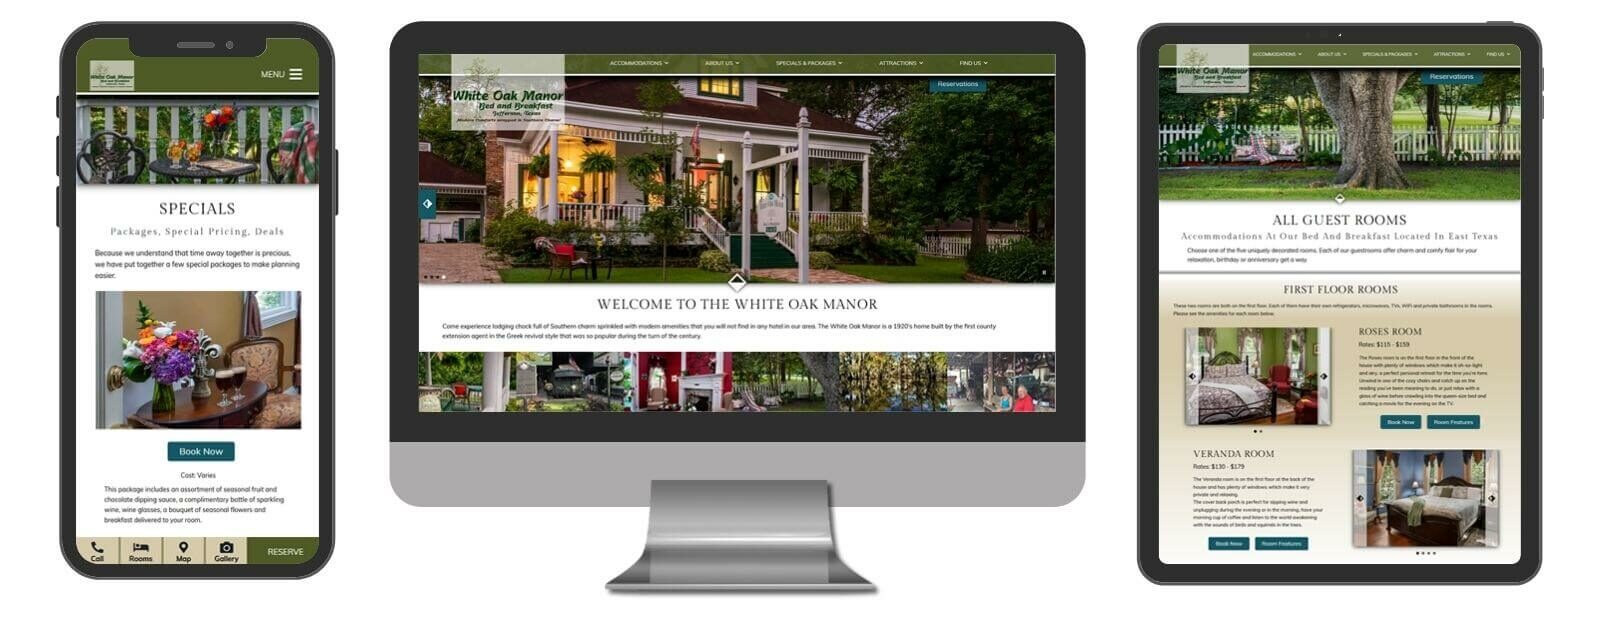 White Oak Manor Bed and Breakfast website displayed in 3 sizes - mobile, template and desktop